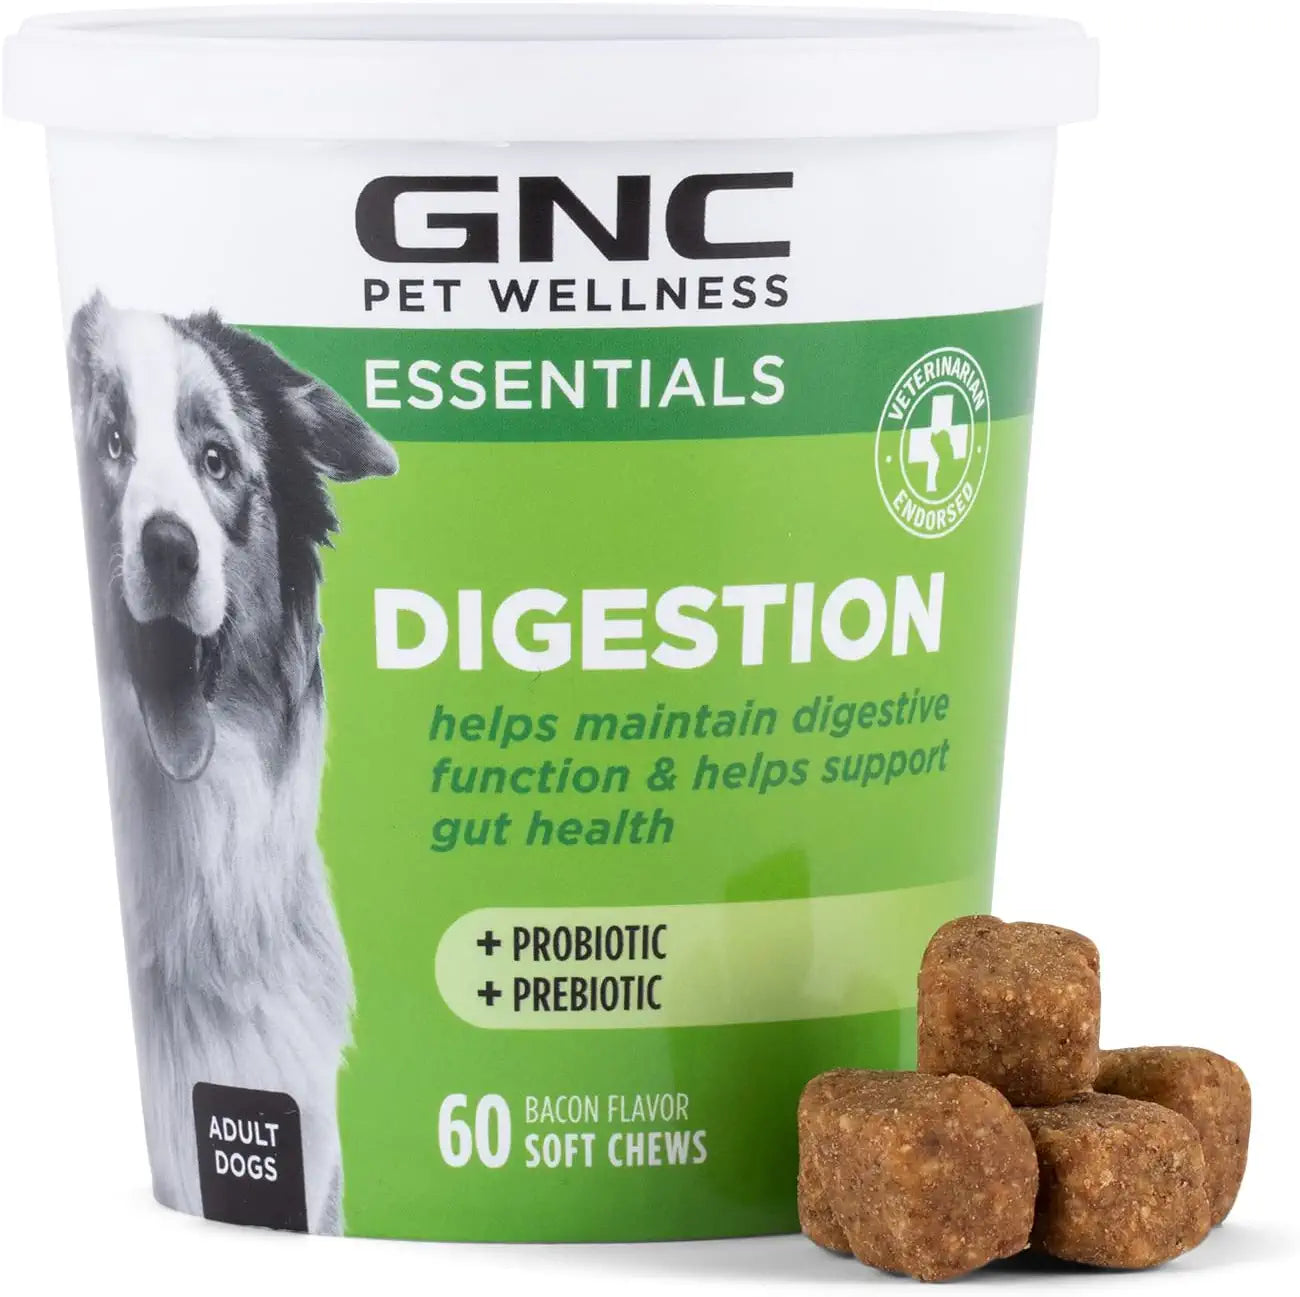 GNC for Pets Essentials Calming Soft Chew Dog Supplements | 60 Ct Chicken Flavor Dog Soft Chew Supplements for Calming and Relaxation | Adult Dog Calming Chews for Anxiety, White